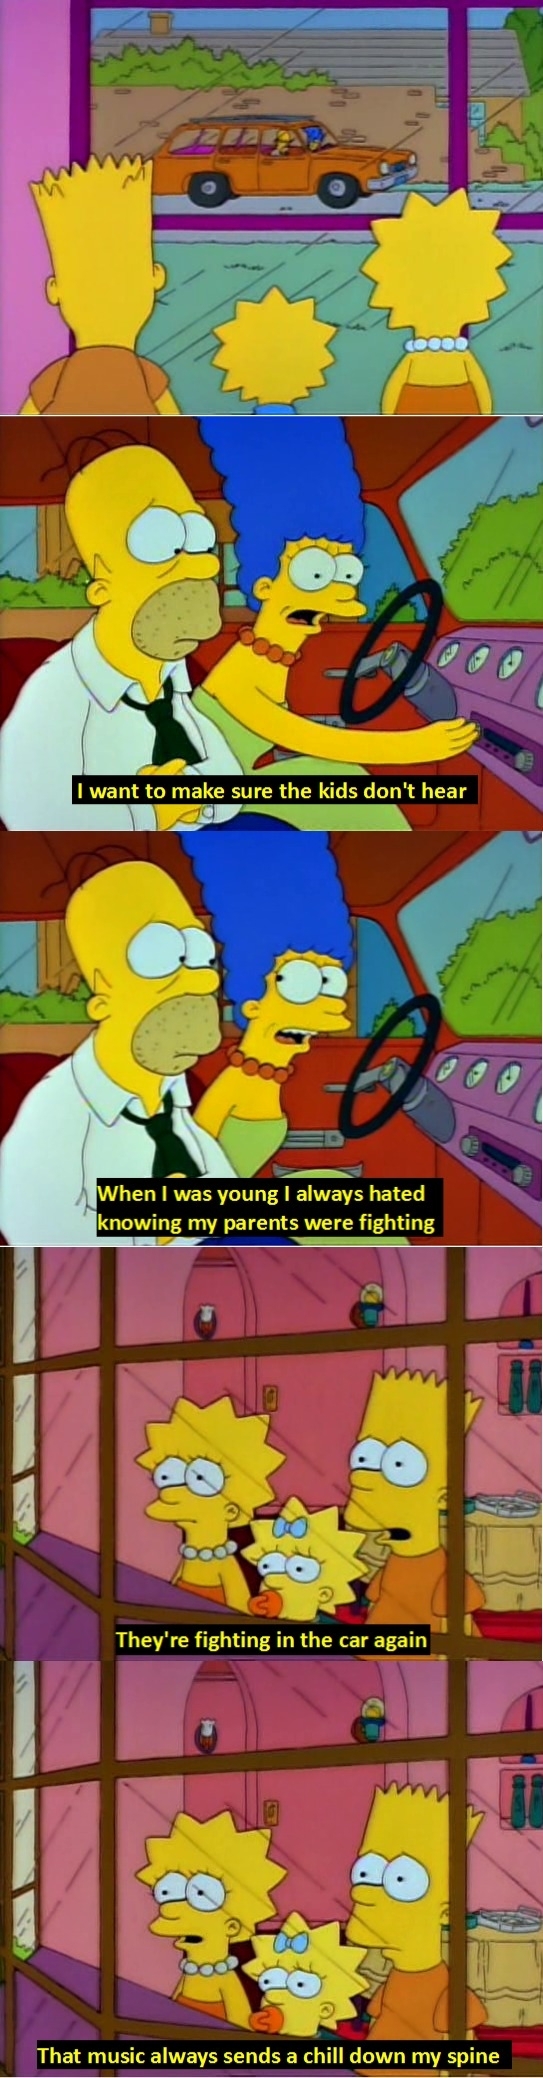 My favorite classic Simpsons moment